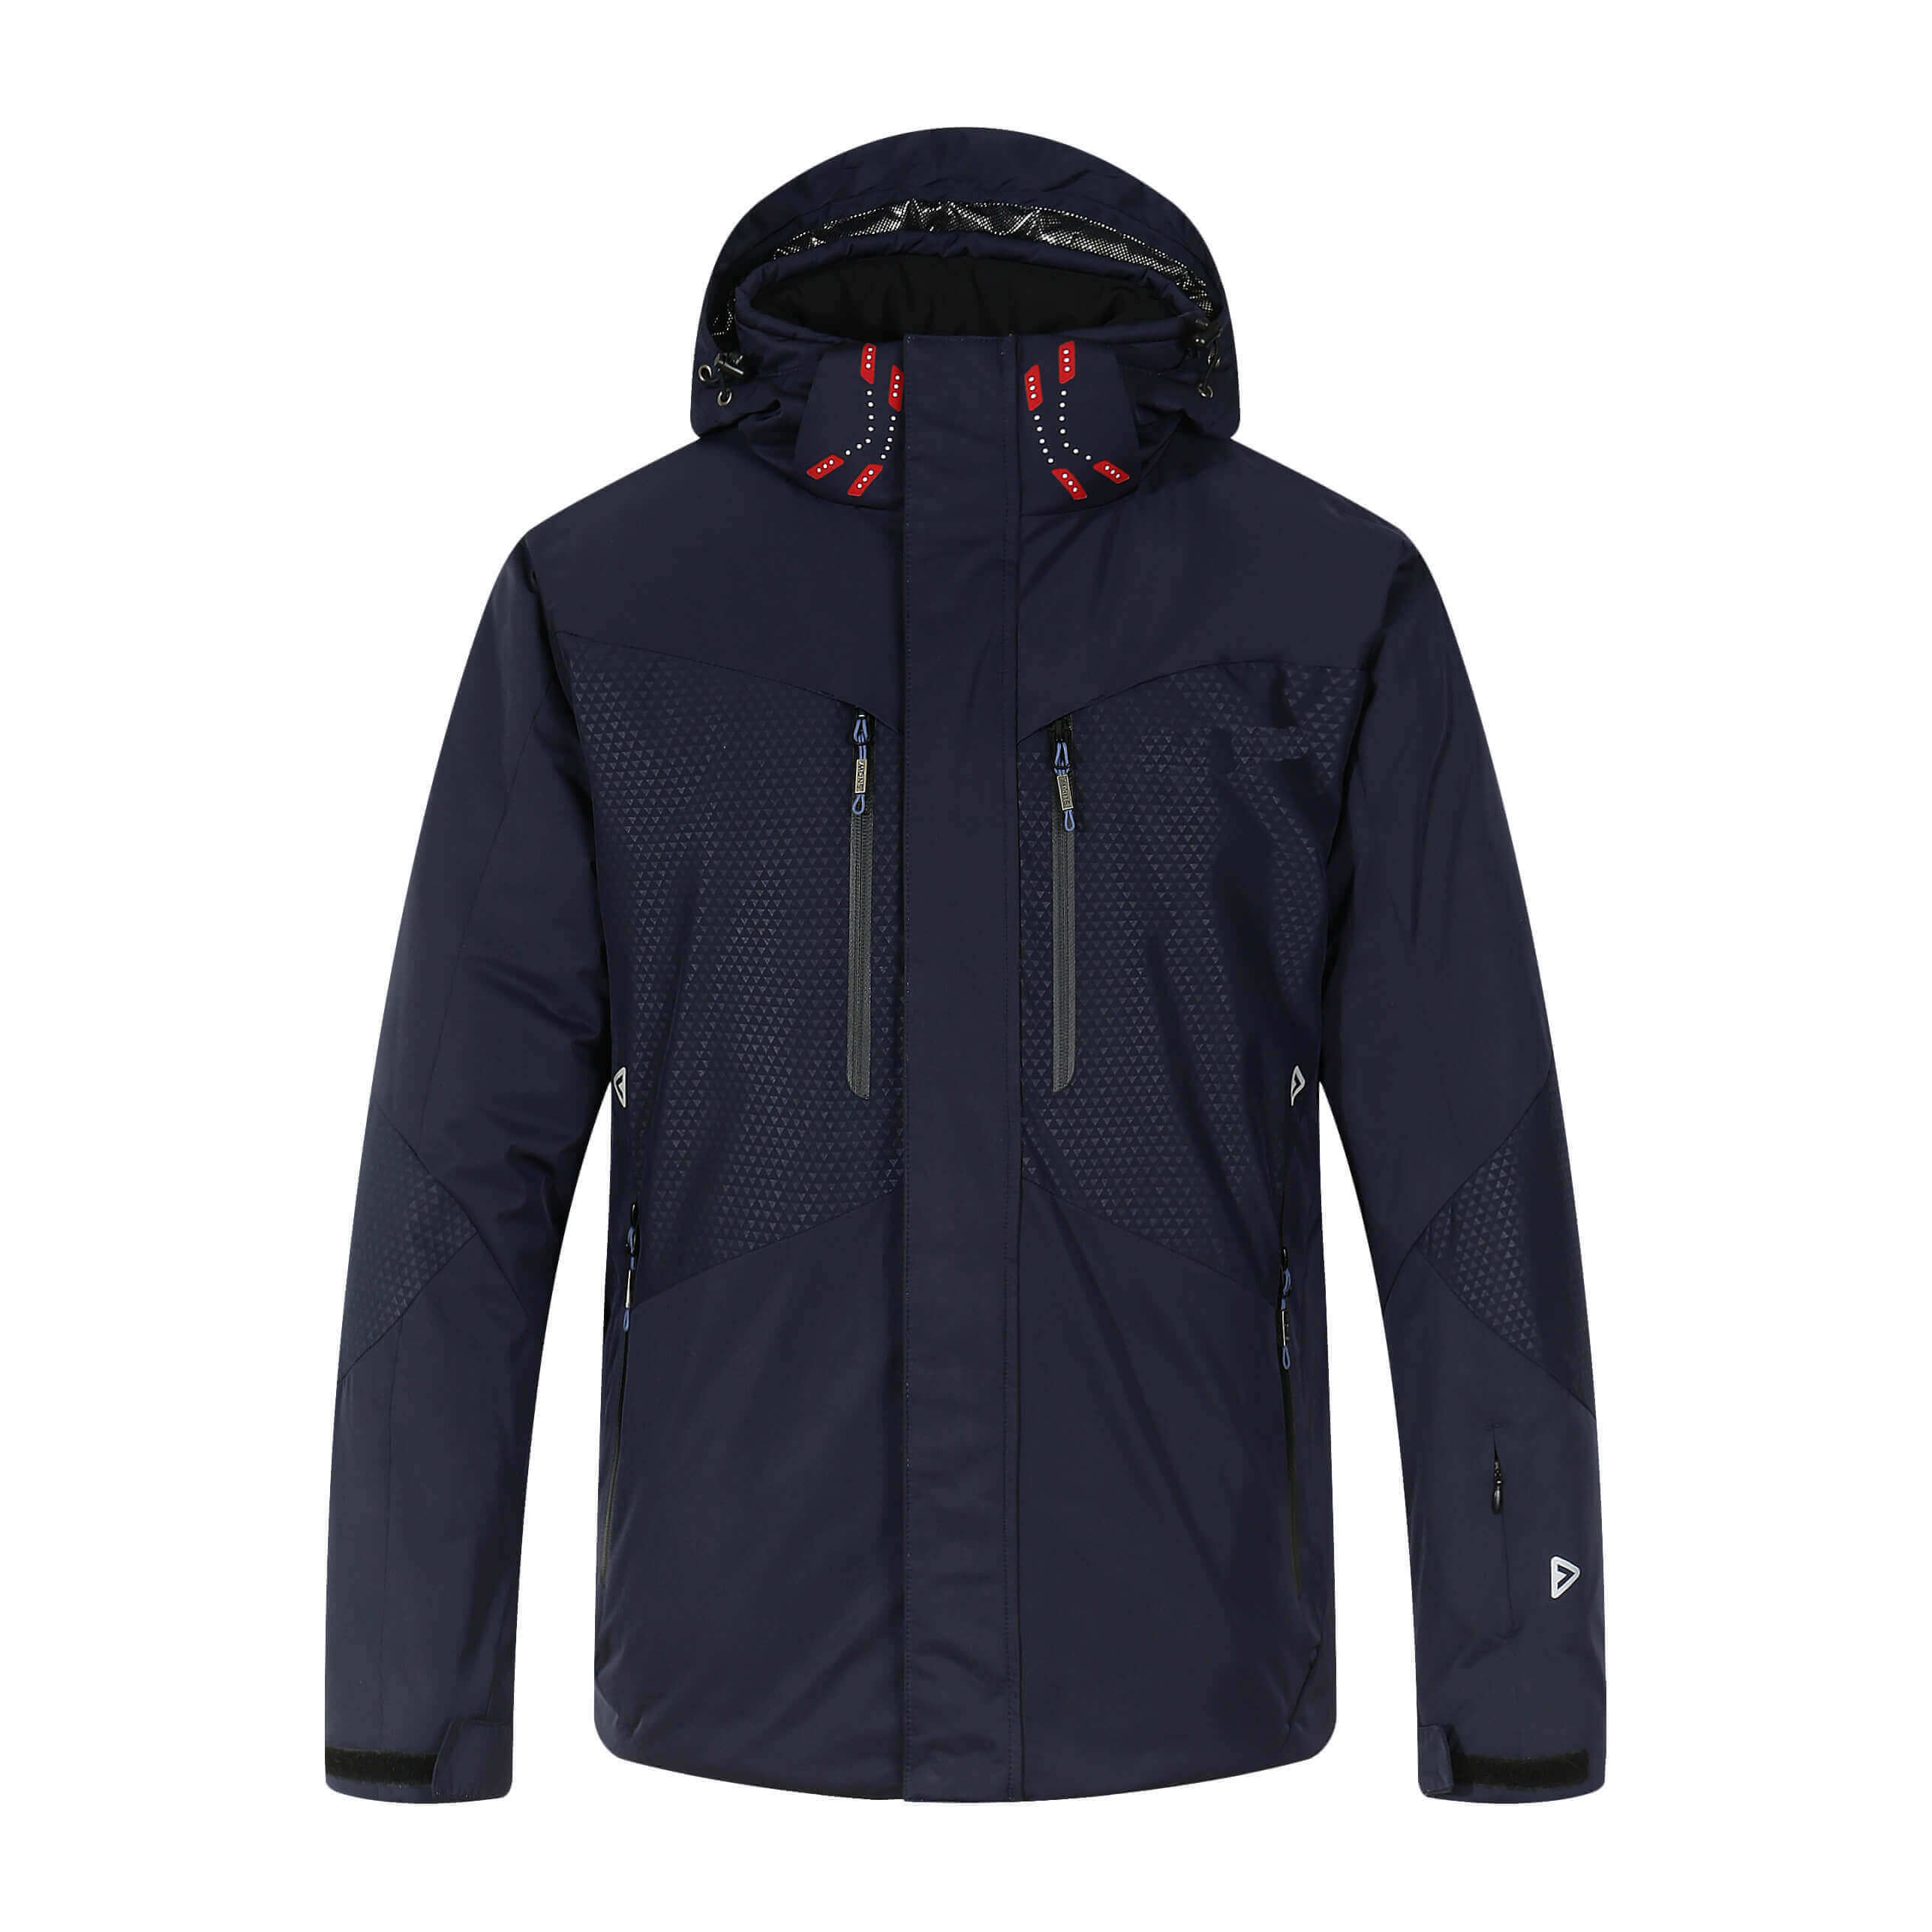 Are Insulated Skiing Jacket Waterproof?